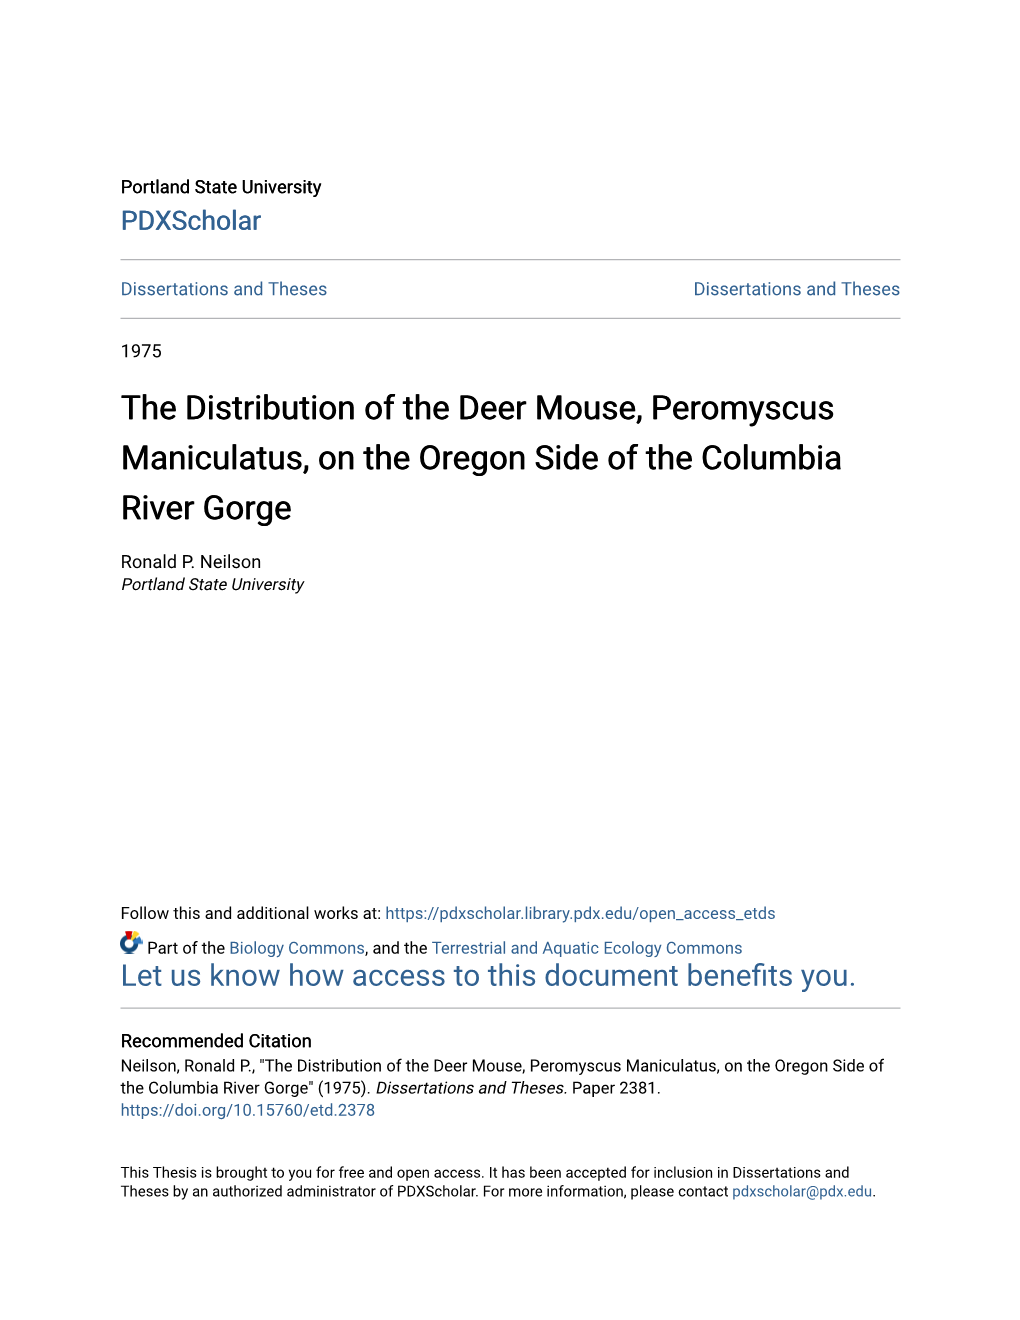 The Distribution of the Deer Mouse, Peromyscus Maniculatus, on the Oregon Side of the Columbia River Gorge